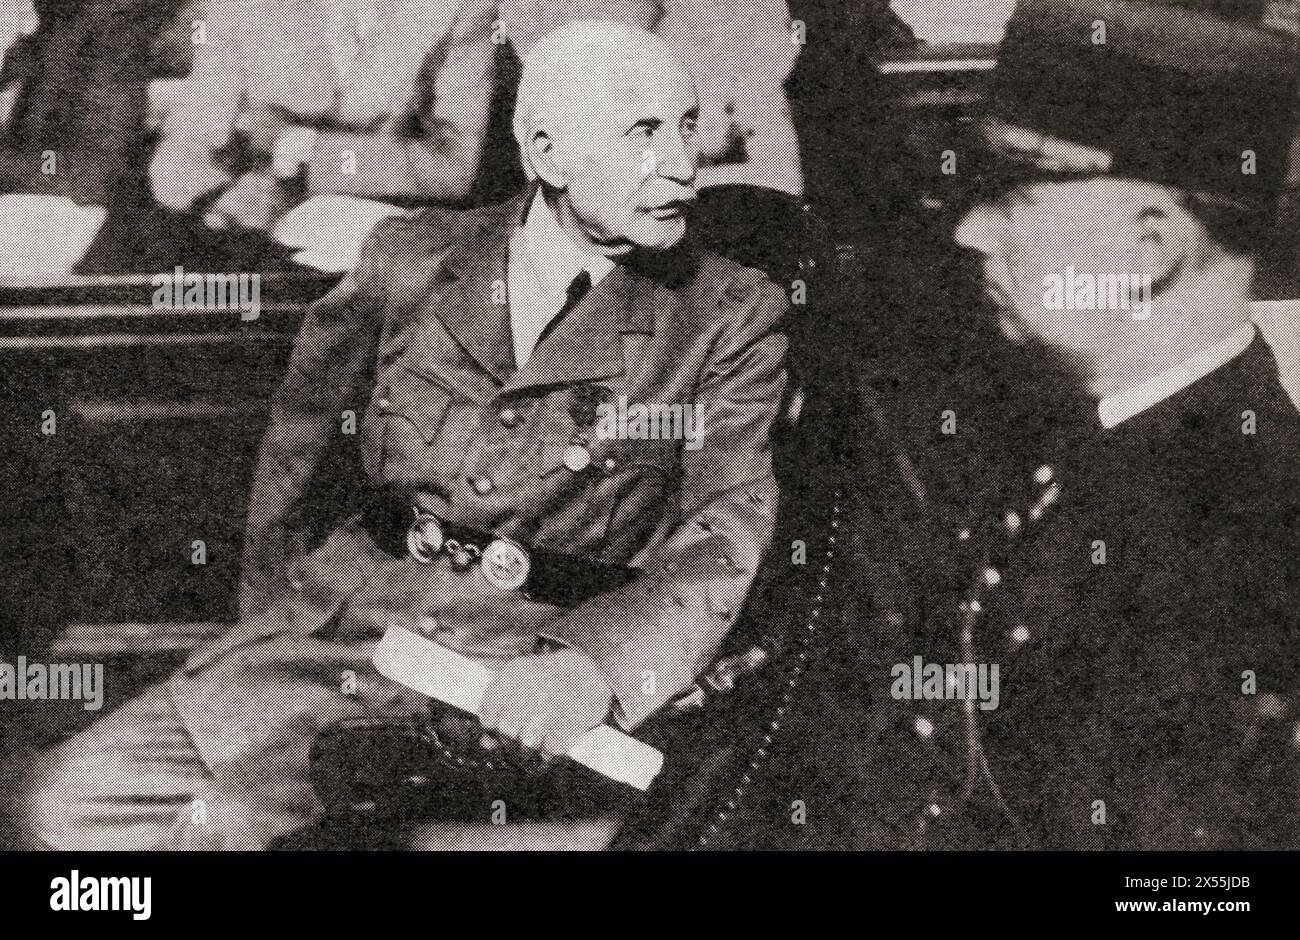 Philippe Petain in court on trial for treason, 23 July, 1945. Henri Philippe Benoni Omer Pétain, 1856 – 1951, aka Philippe Pétain or Marshal Pétain. General commander of the French Army in World War I and head of the collaborationist regime of Vichy France, from 1940 to 1944. From The War in Pictures, Sixth Year. Stock Photo